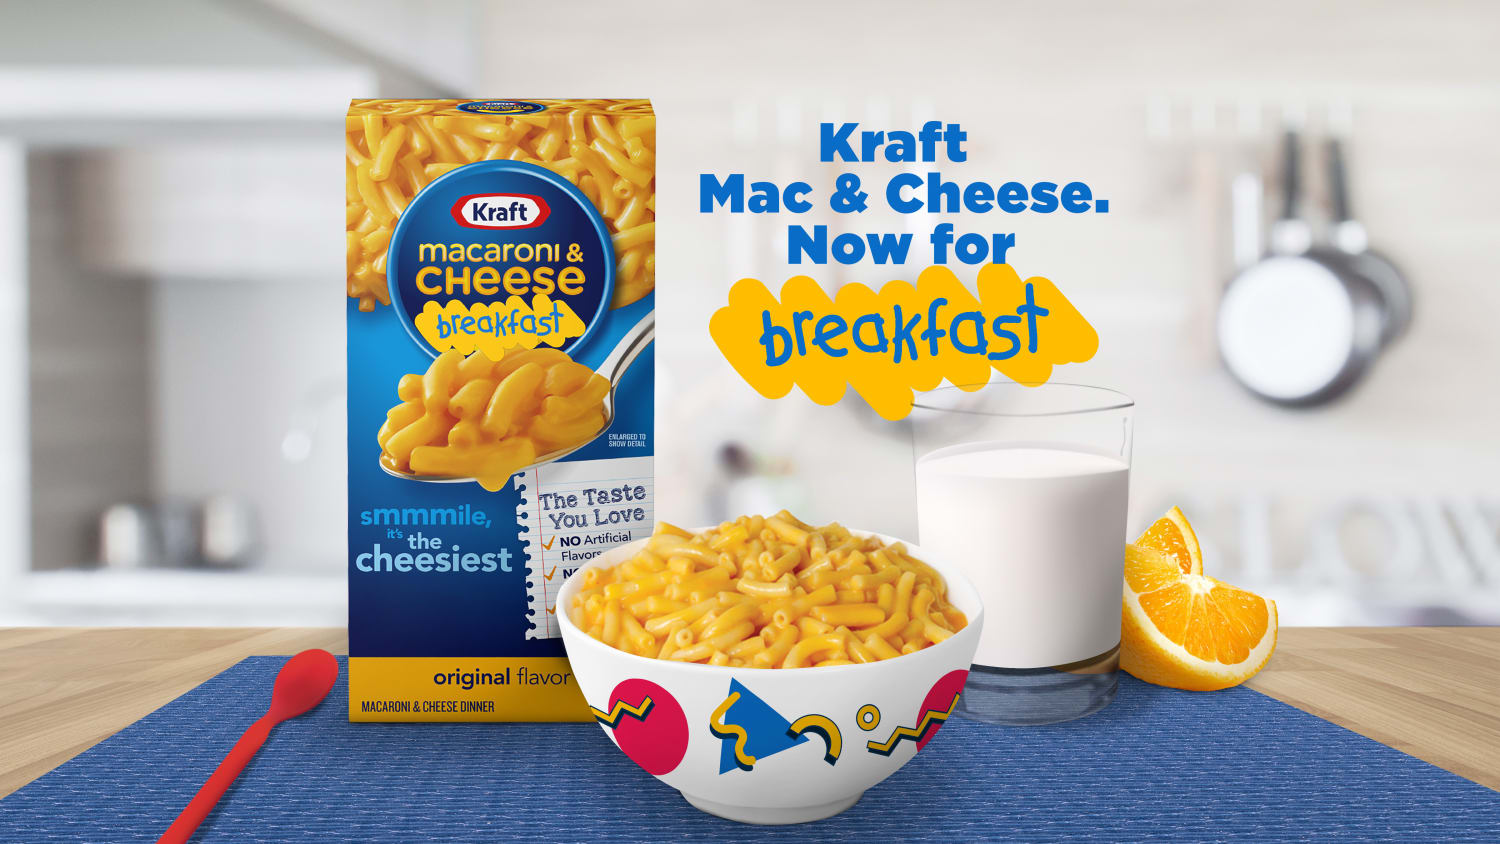 Does Kraft Mac and Cheese Have Eggs?